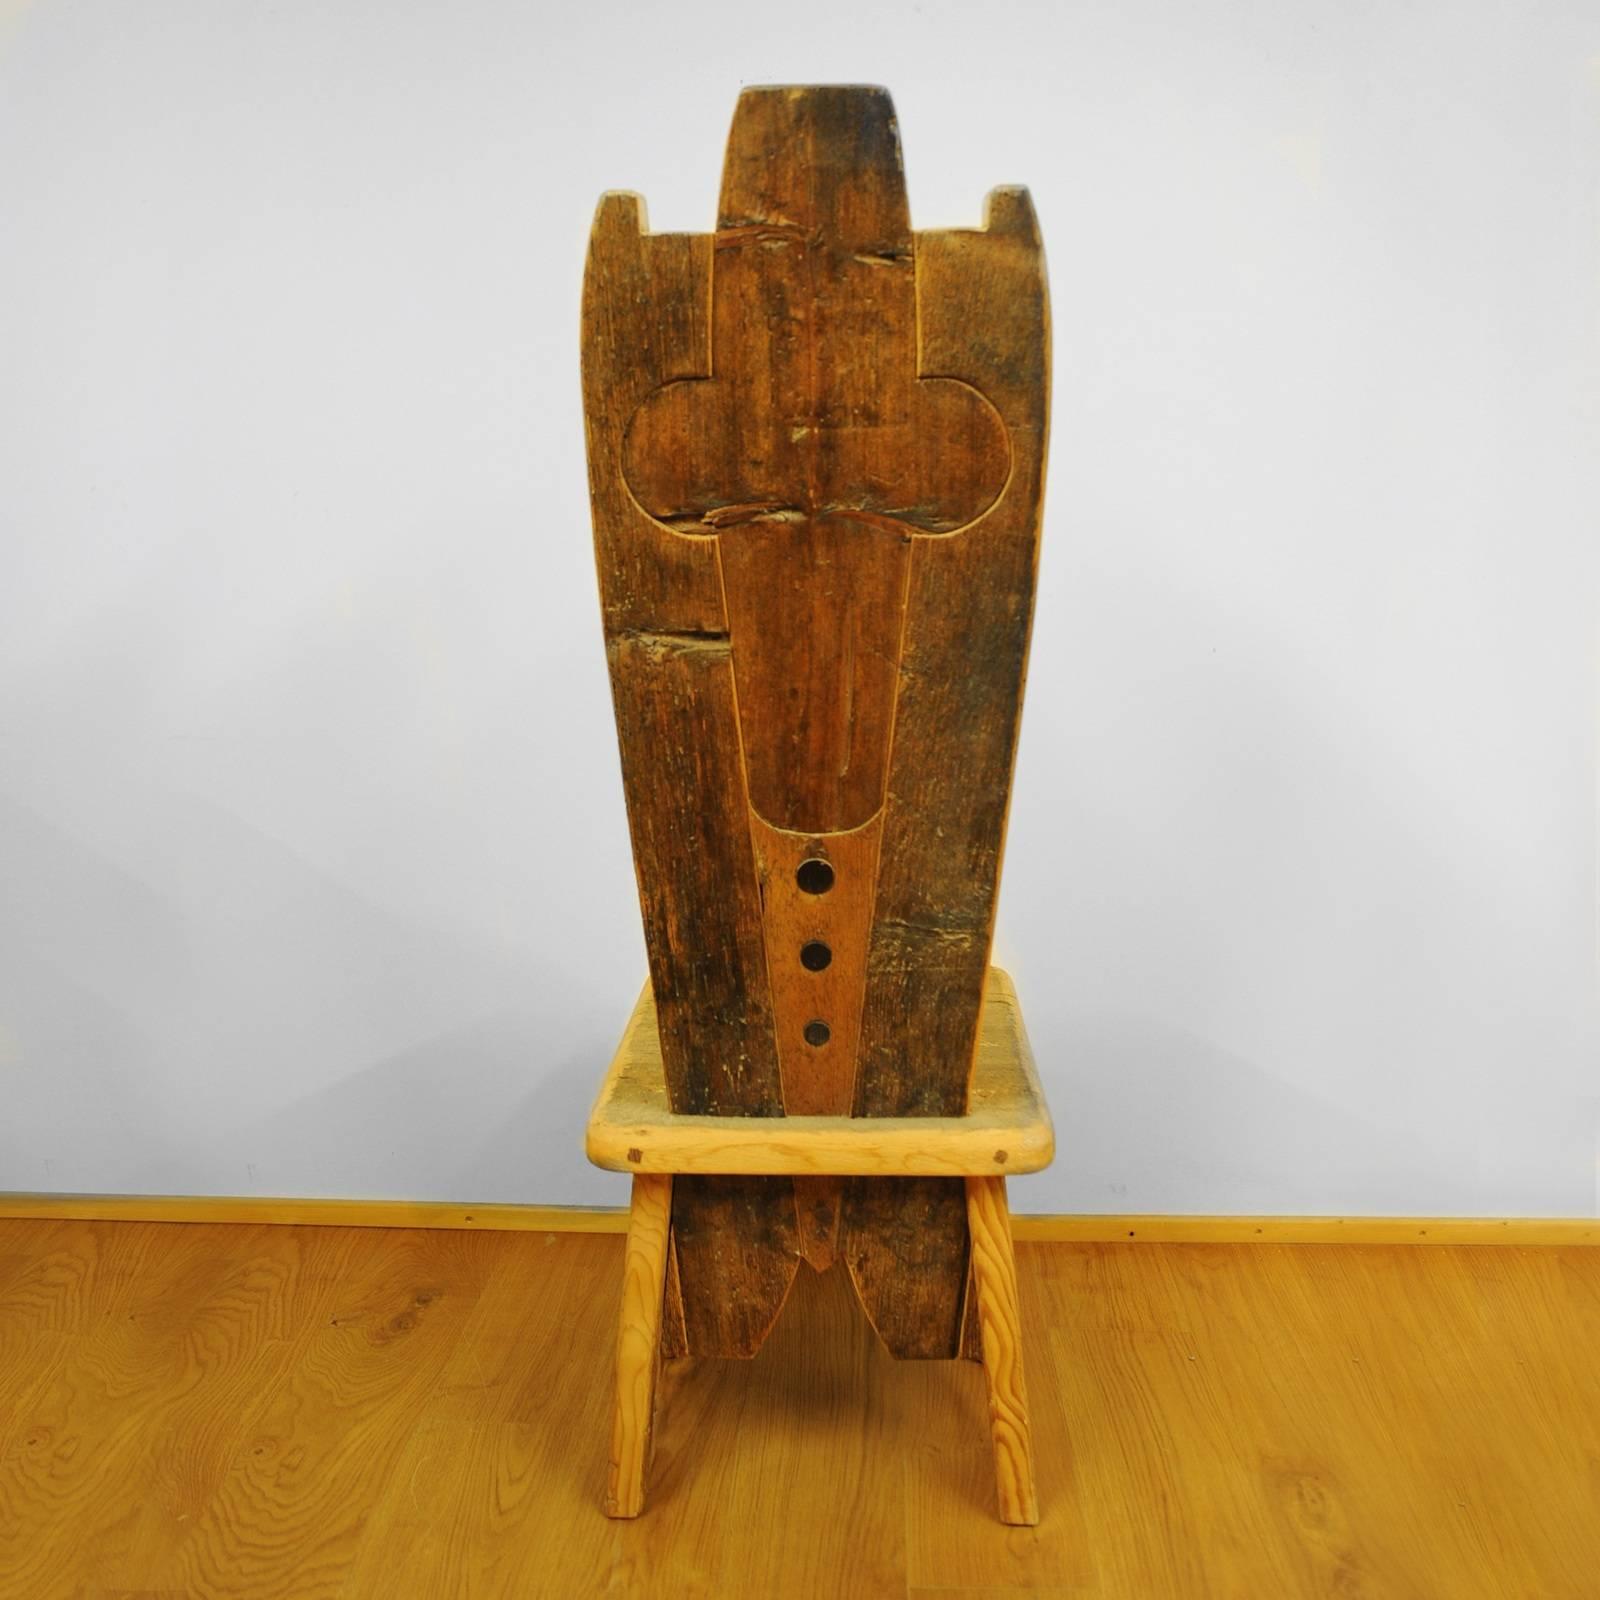 A stunning piece of functional decor, this chair is part of the Throne collection, featuring 20 designs that boast a throne-shaped backrest. This chair is crafted using larch, pine, fir, and Swiss pine sourced from old 16th century homes. The